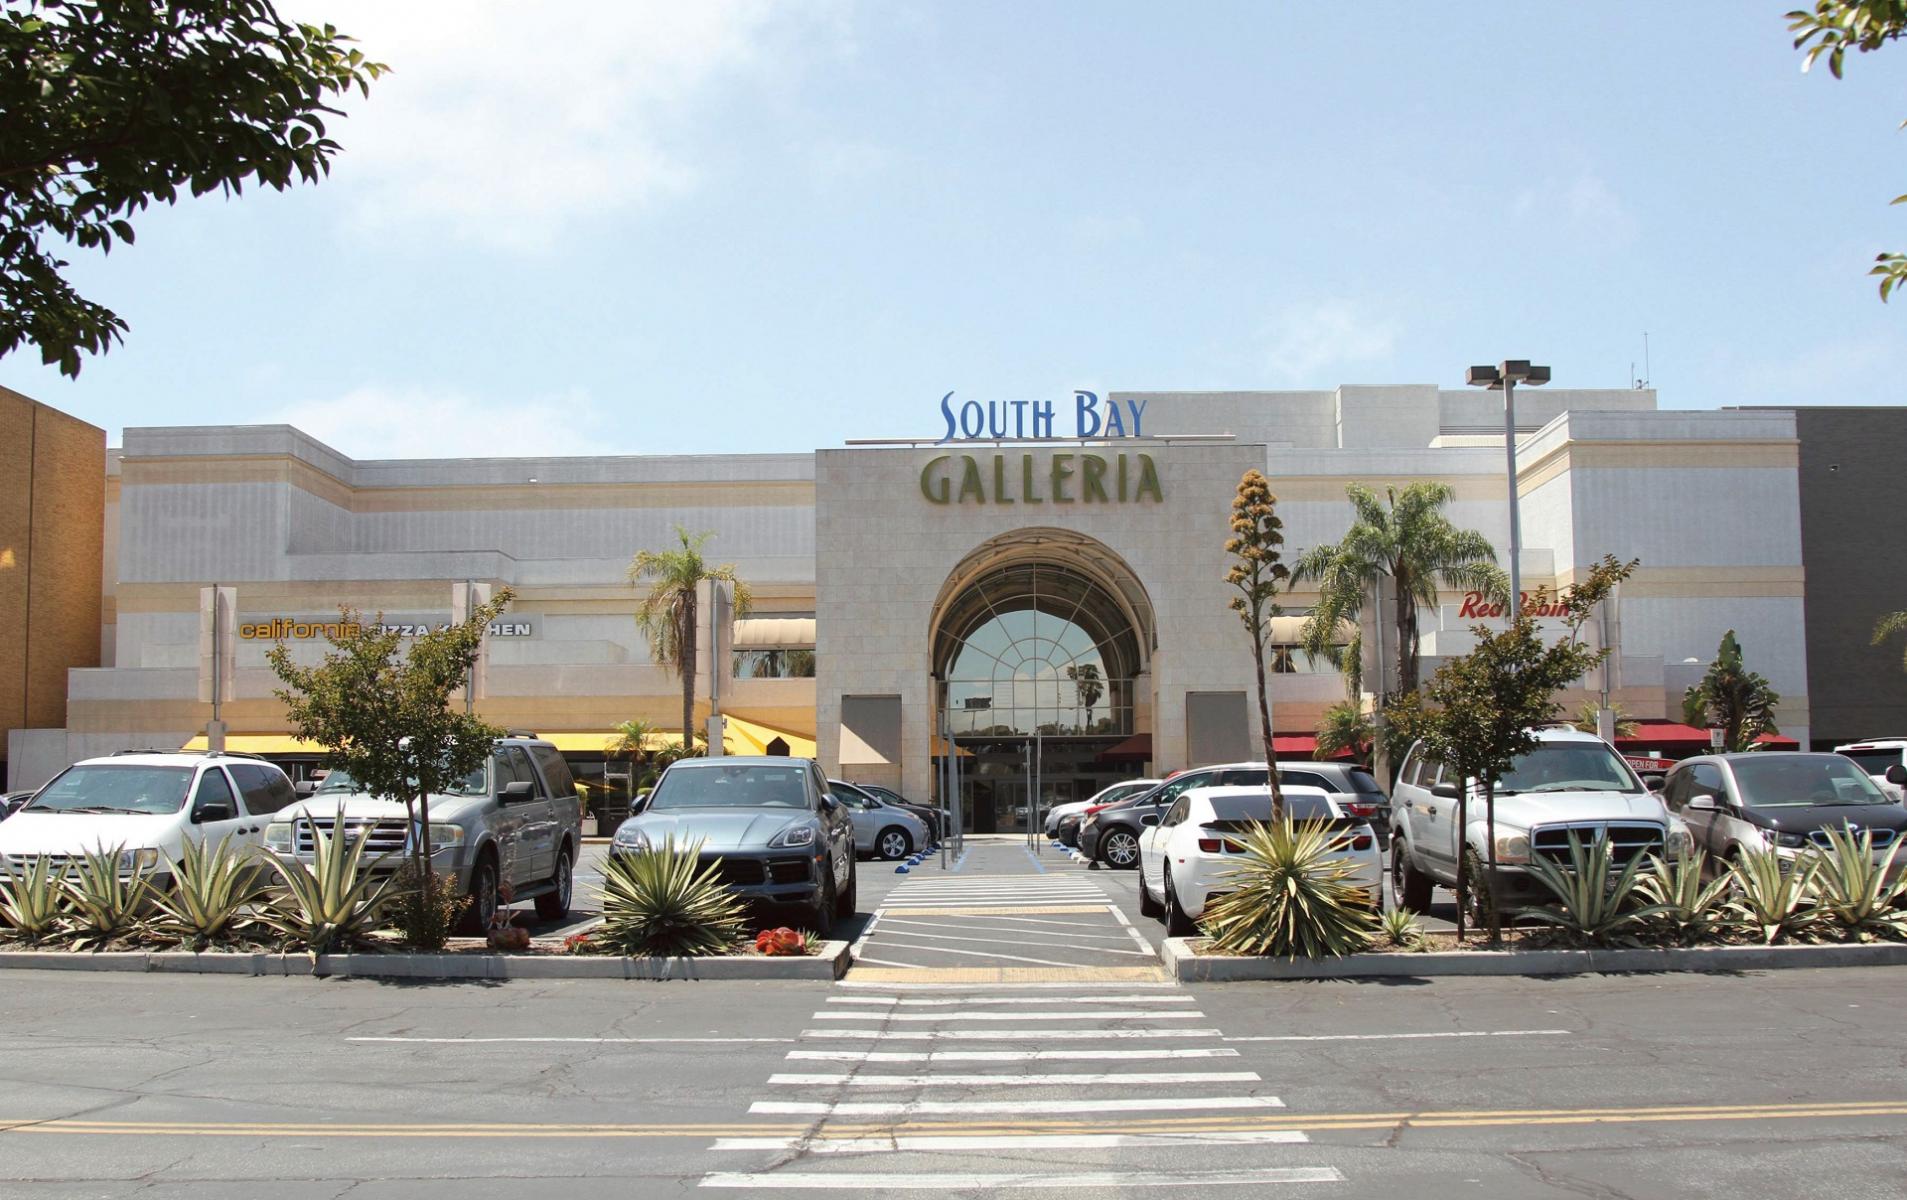 Here's a look at the first phase of the South Bay Galleria redevelopment